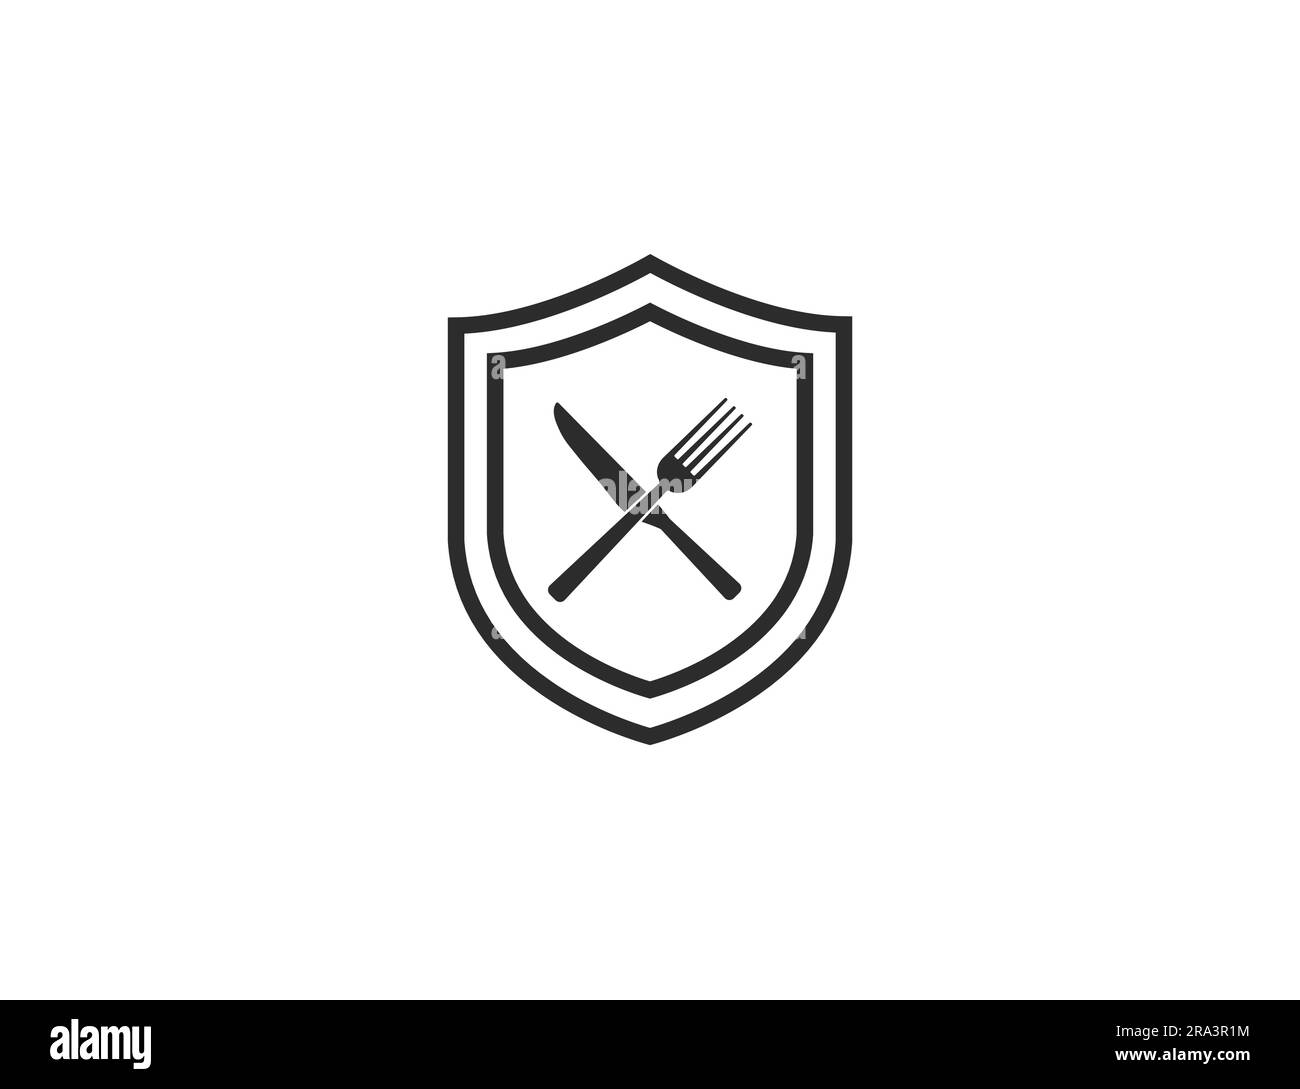 Food safety icon. Vector illustration. Stock Vector